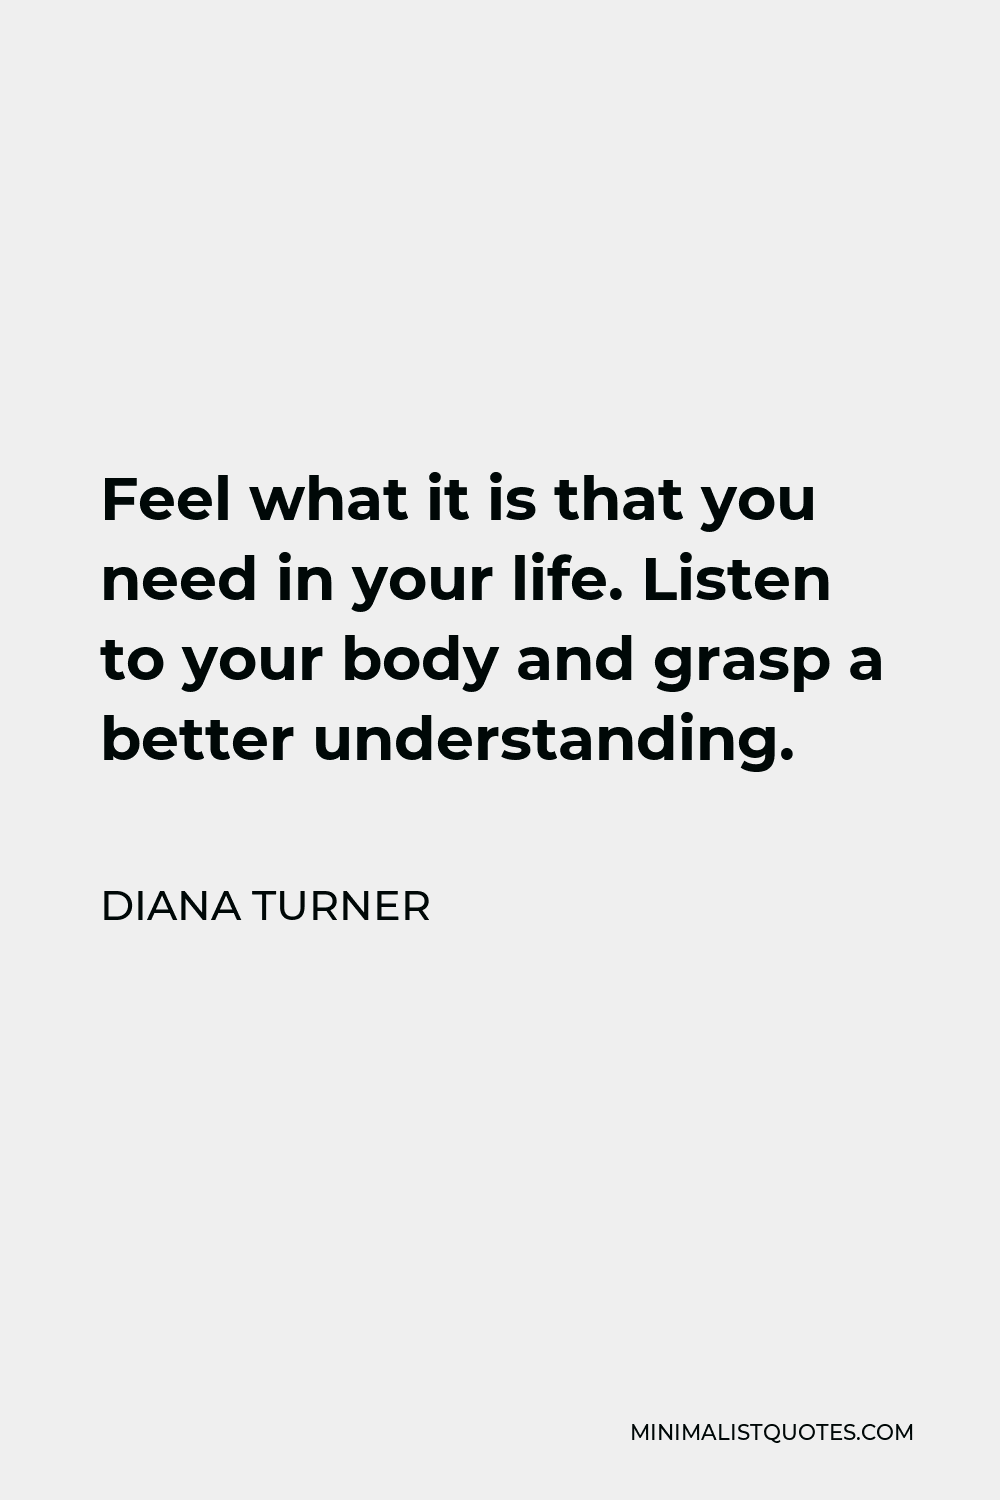 Diana Turner Quote - Feel what it is that you need in your life. Listen to your body and grasp a better understanding.